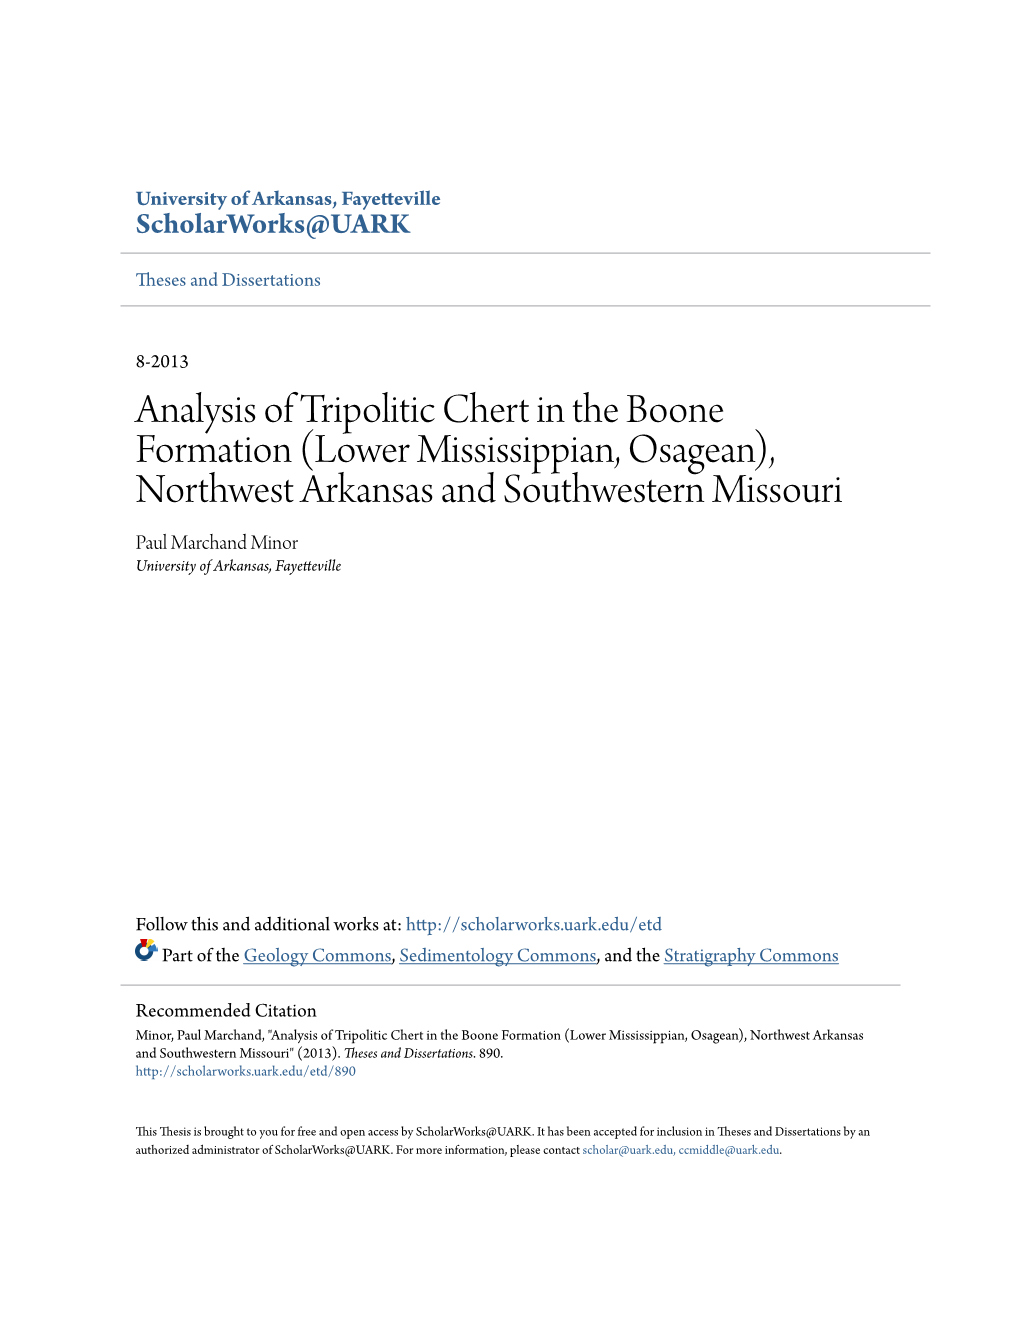 Analysis of Tripolitic Chert in the Boone Formation